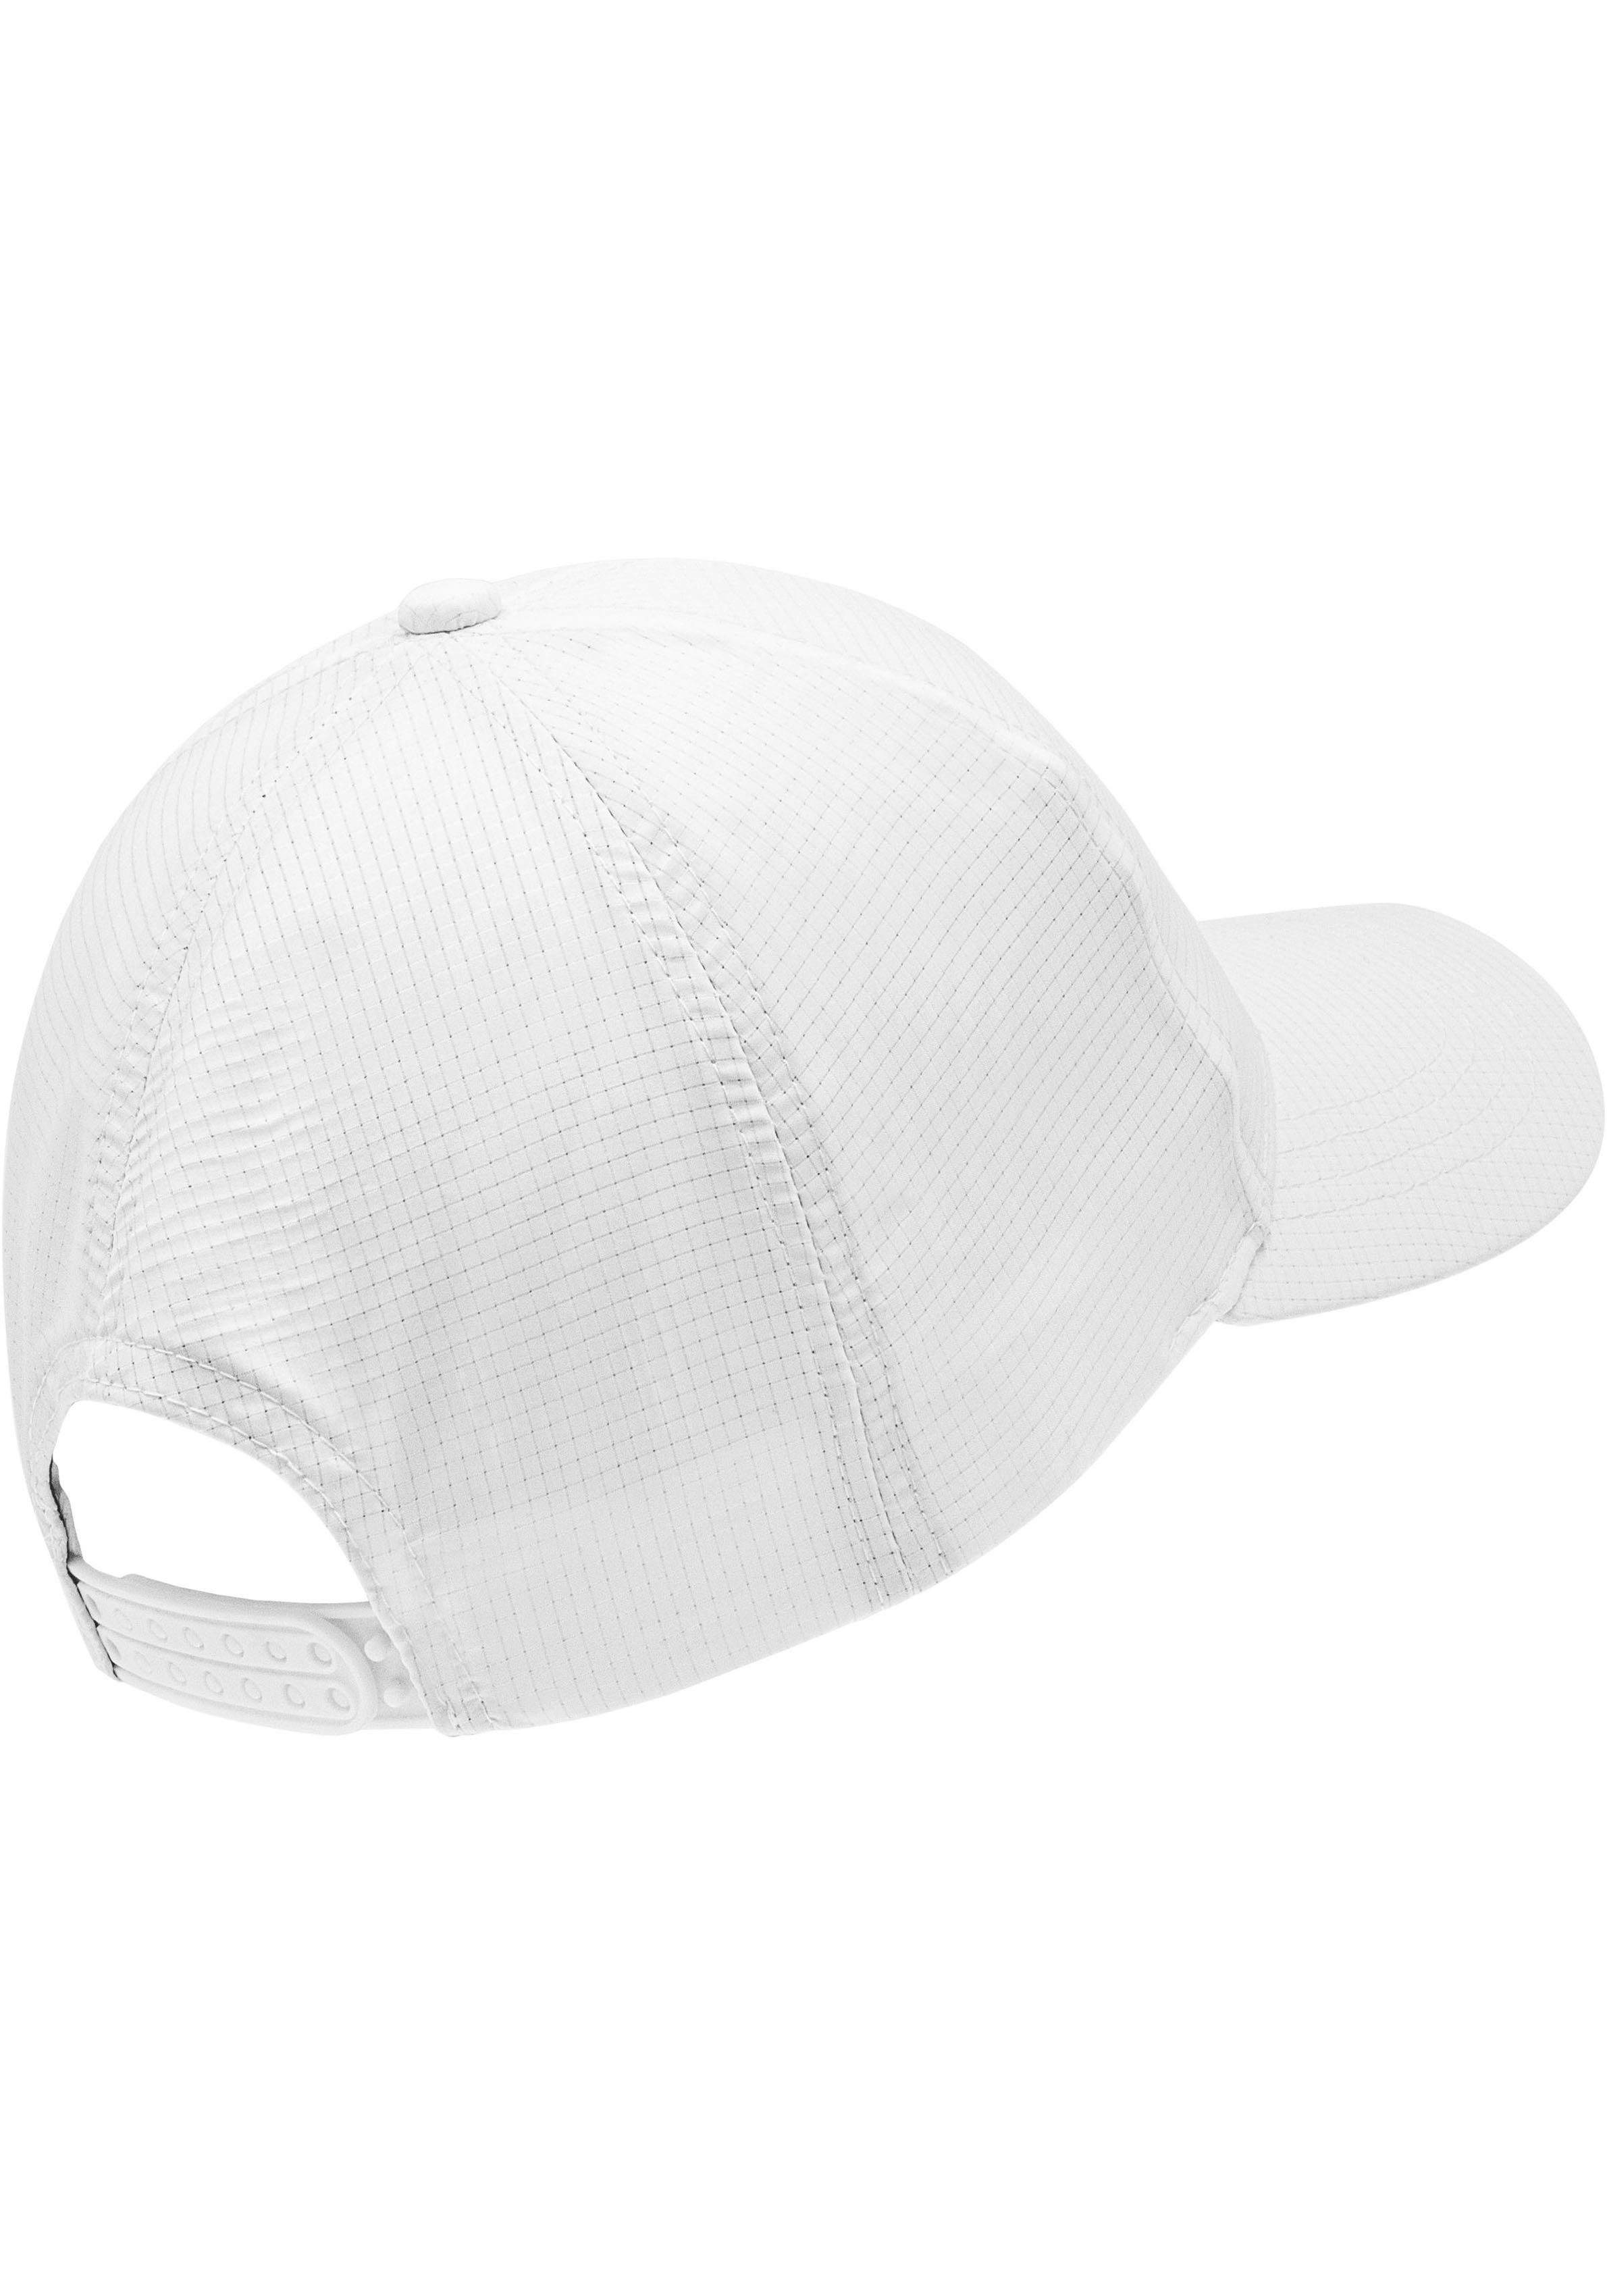 Cap Baseball Hat chillouts weiß Langley